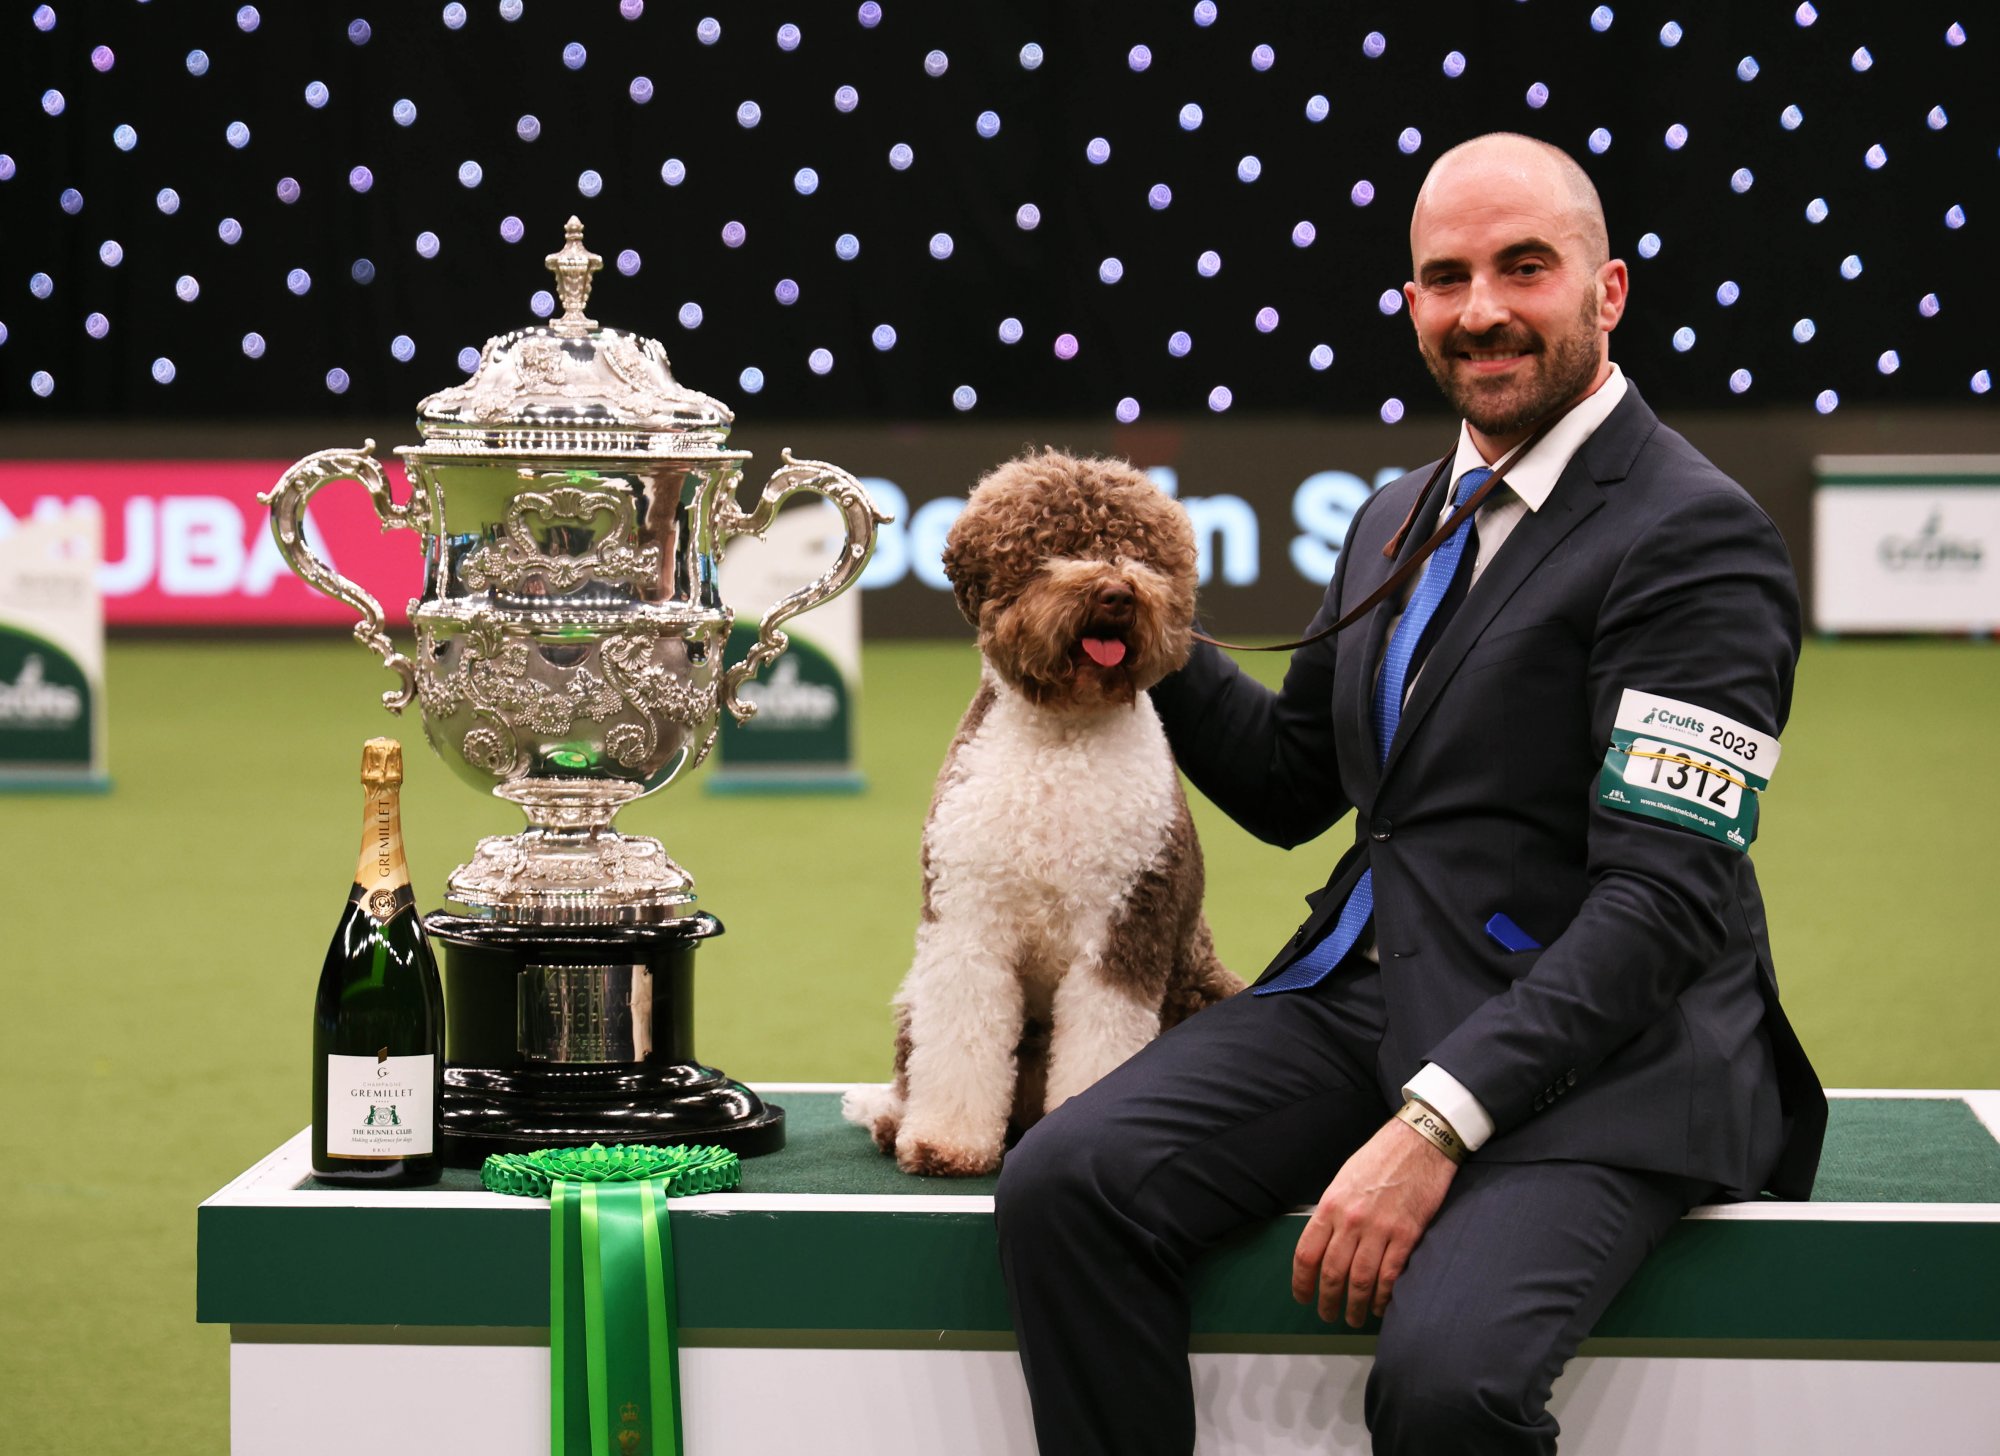 Crufts: The World's Greatest Dog Show | Event & Competitions